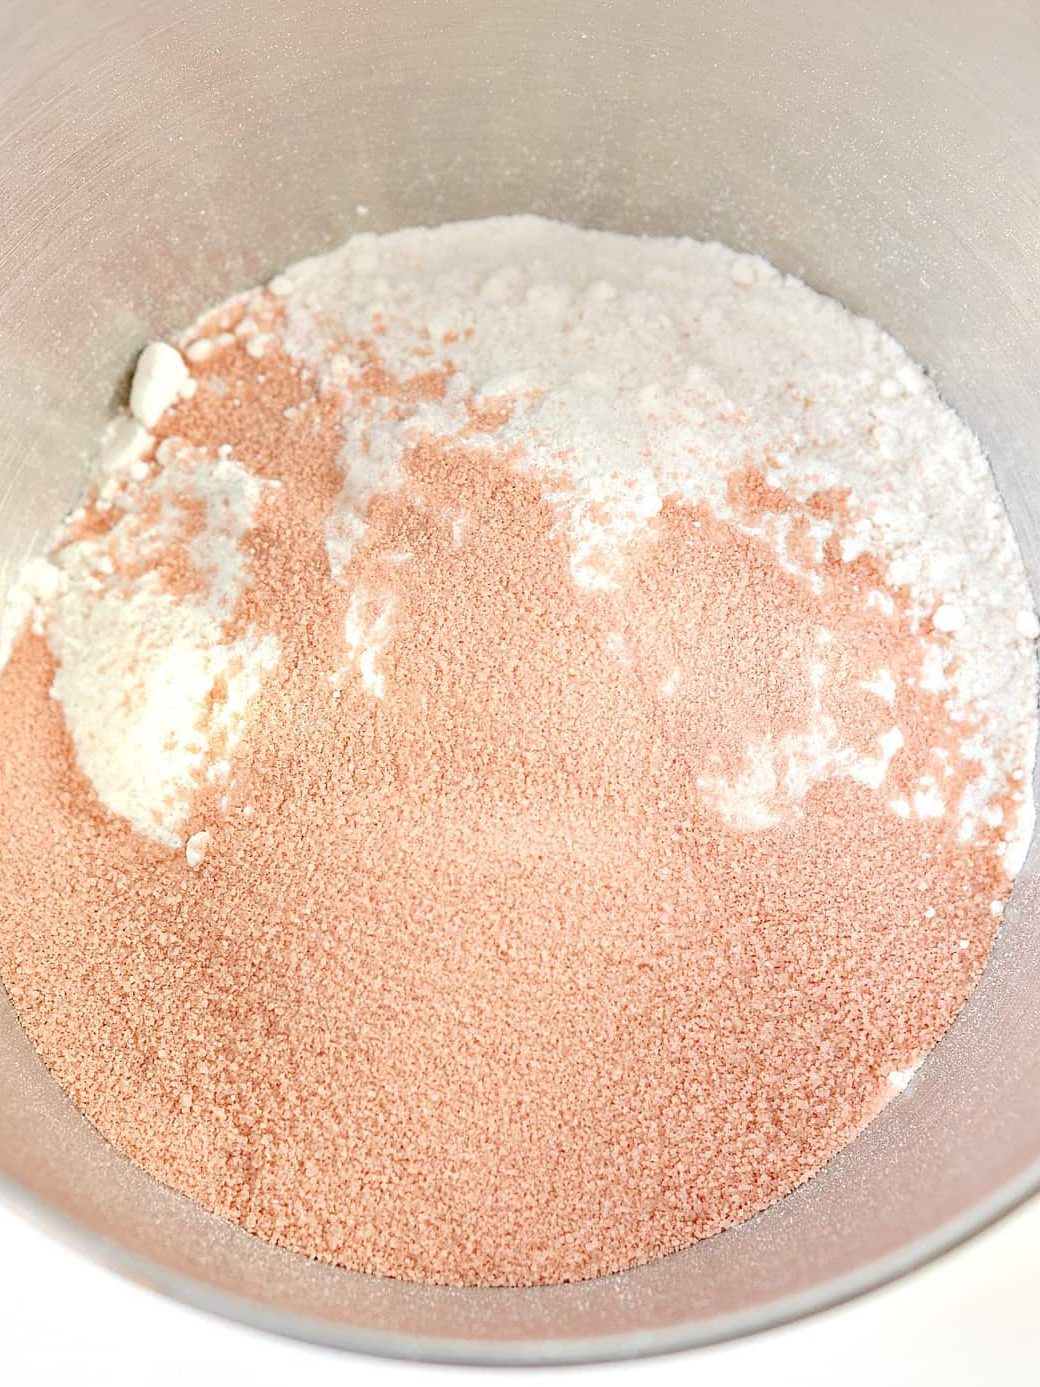 Mix together the white cake mix and box of strawberry Jello in a mixing bowl.